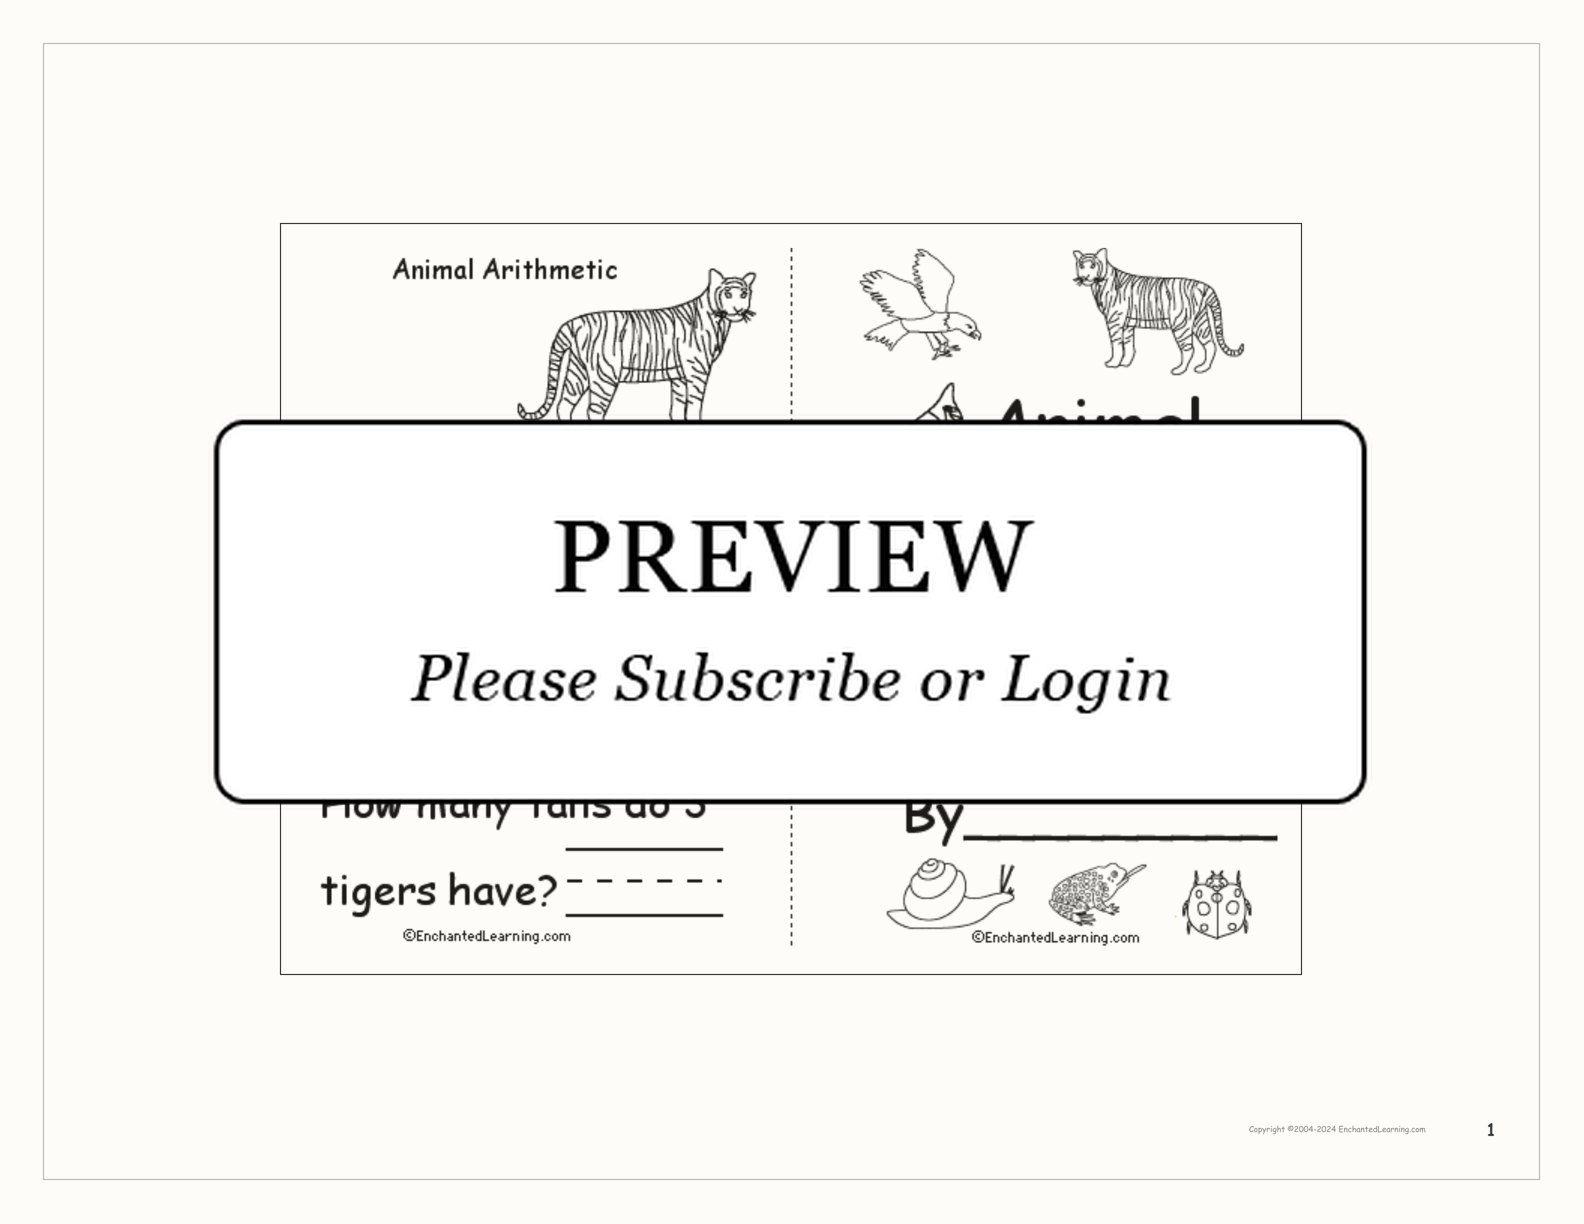 Animal Arithmetic Book (with pictures) interactive printout page 1